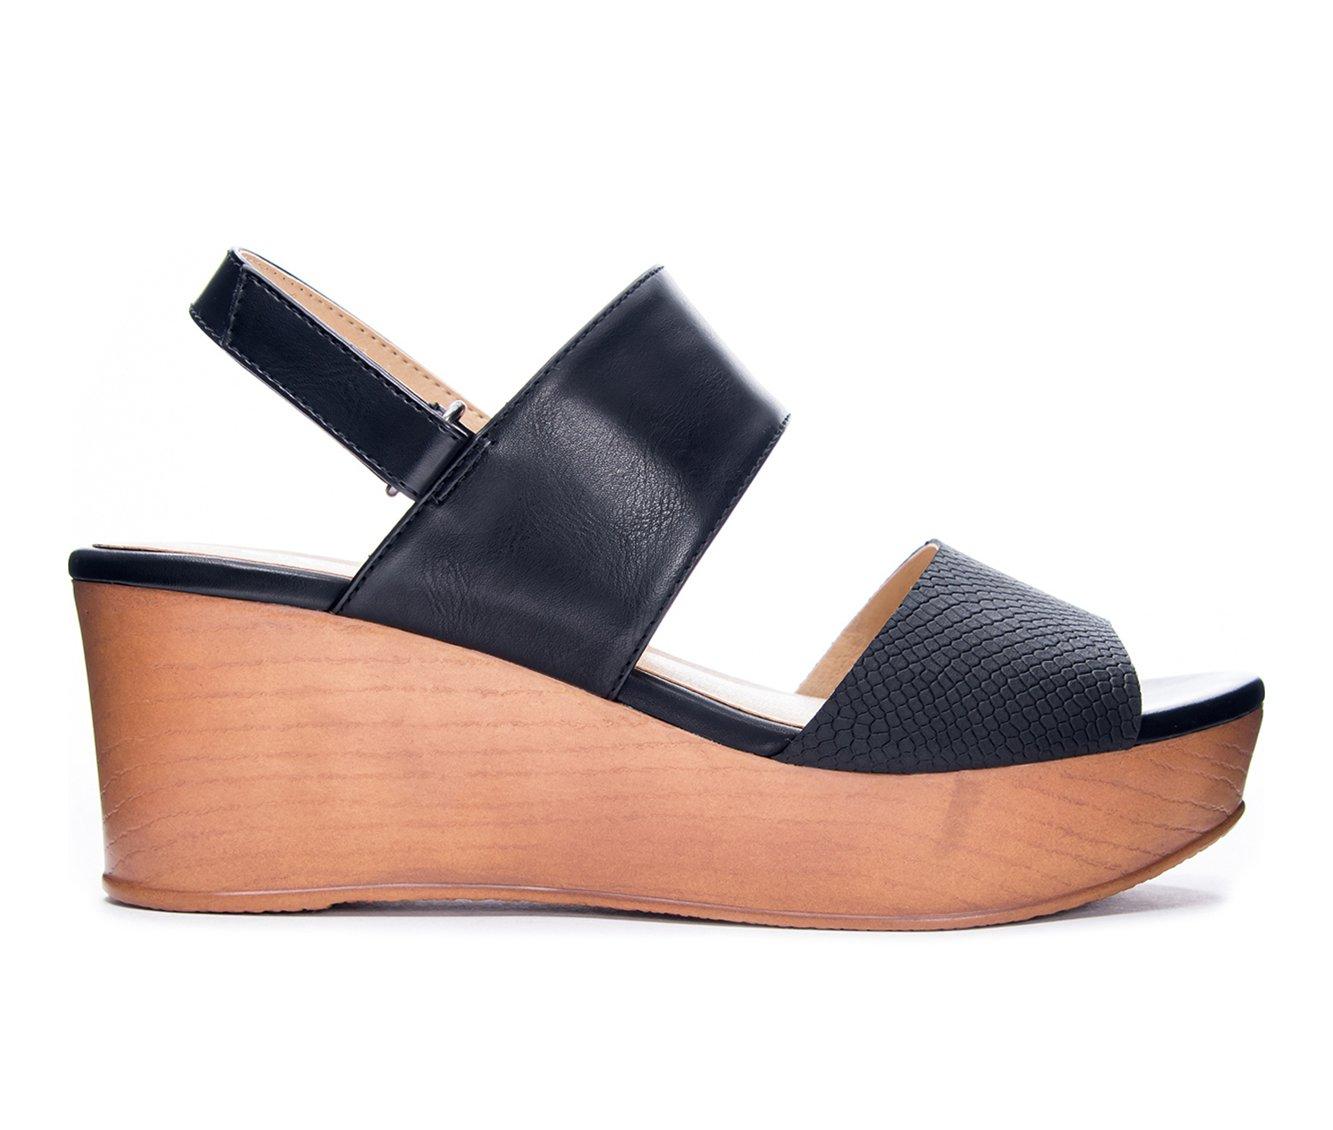 Women's CL By Laundry Christel Wedges